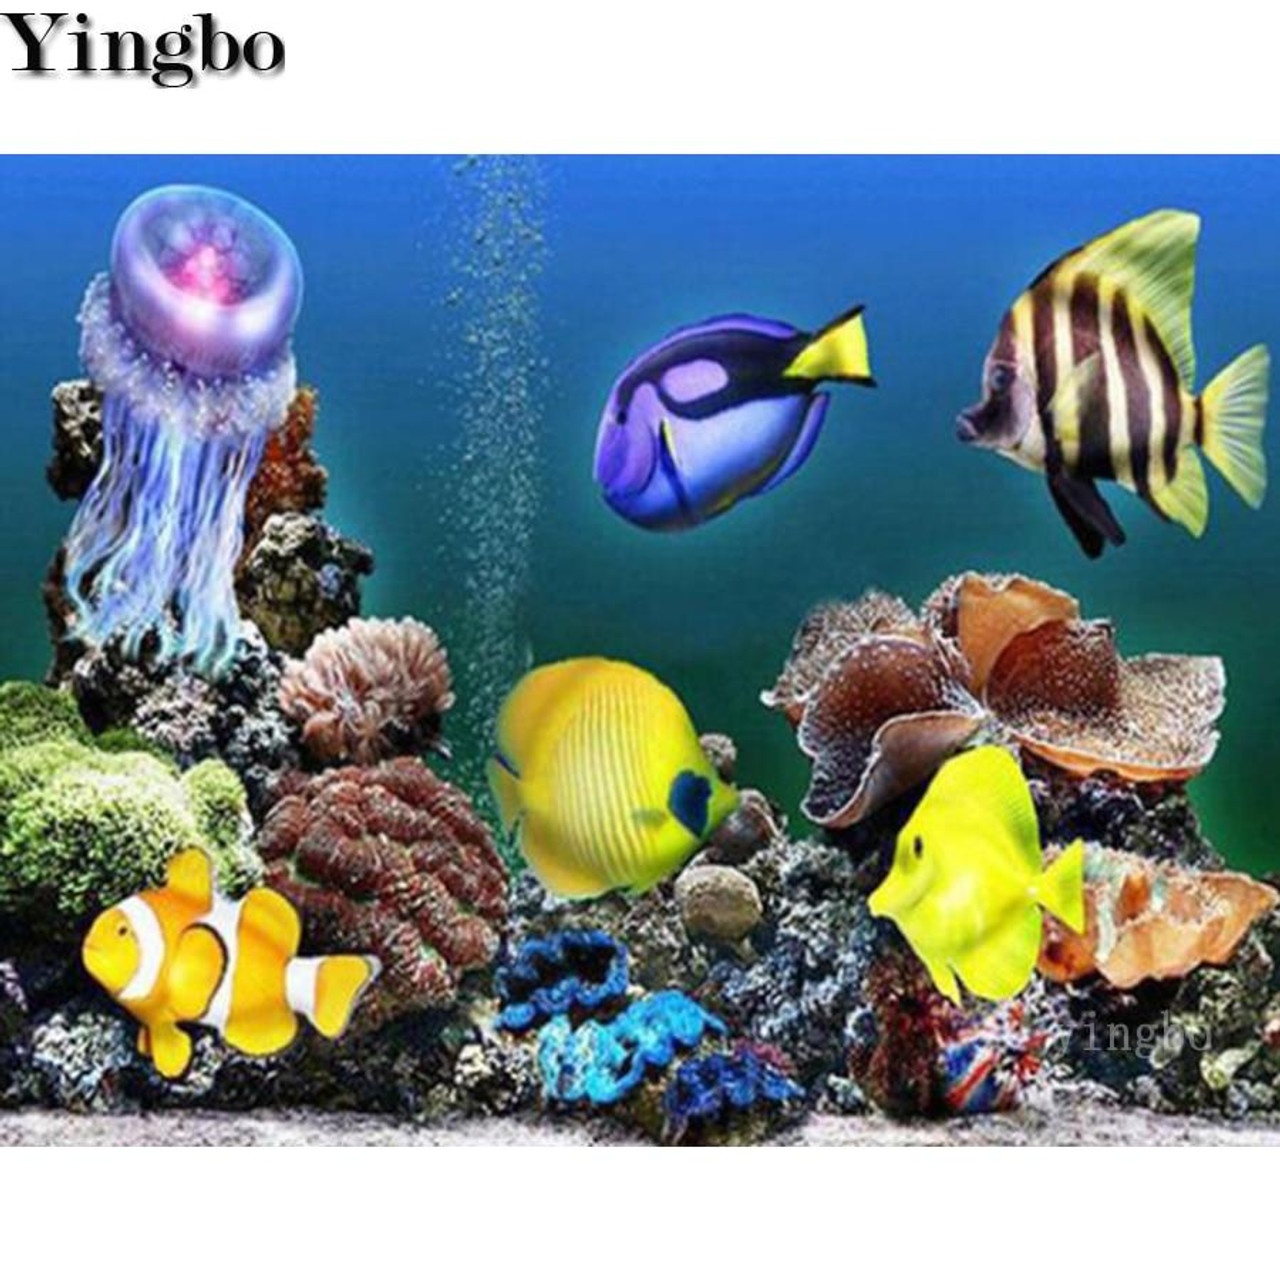 https://cdn11.bigcommerce.com/s-xf1j2e32mt/images/stencil/1280x1280/products/371/3736/5d-diamond-painting-jelly-fish-and-tropical-fish-kit-29028437033143__45950.1630509918.jpg?c=1